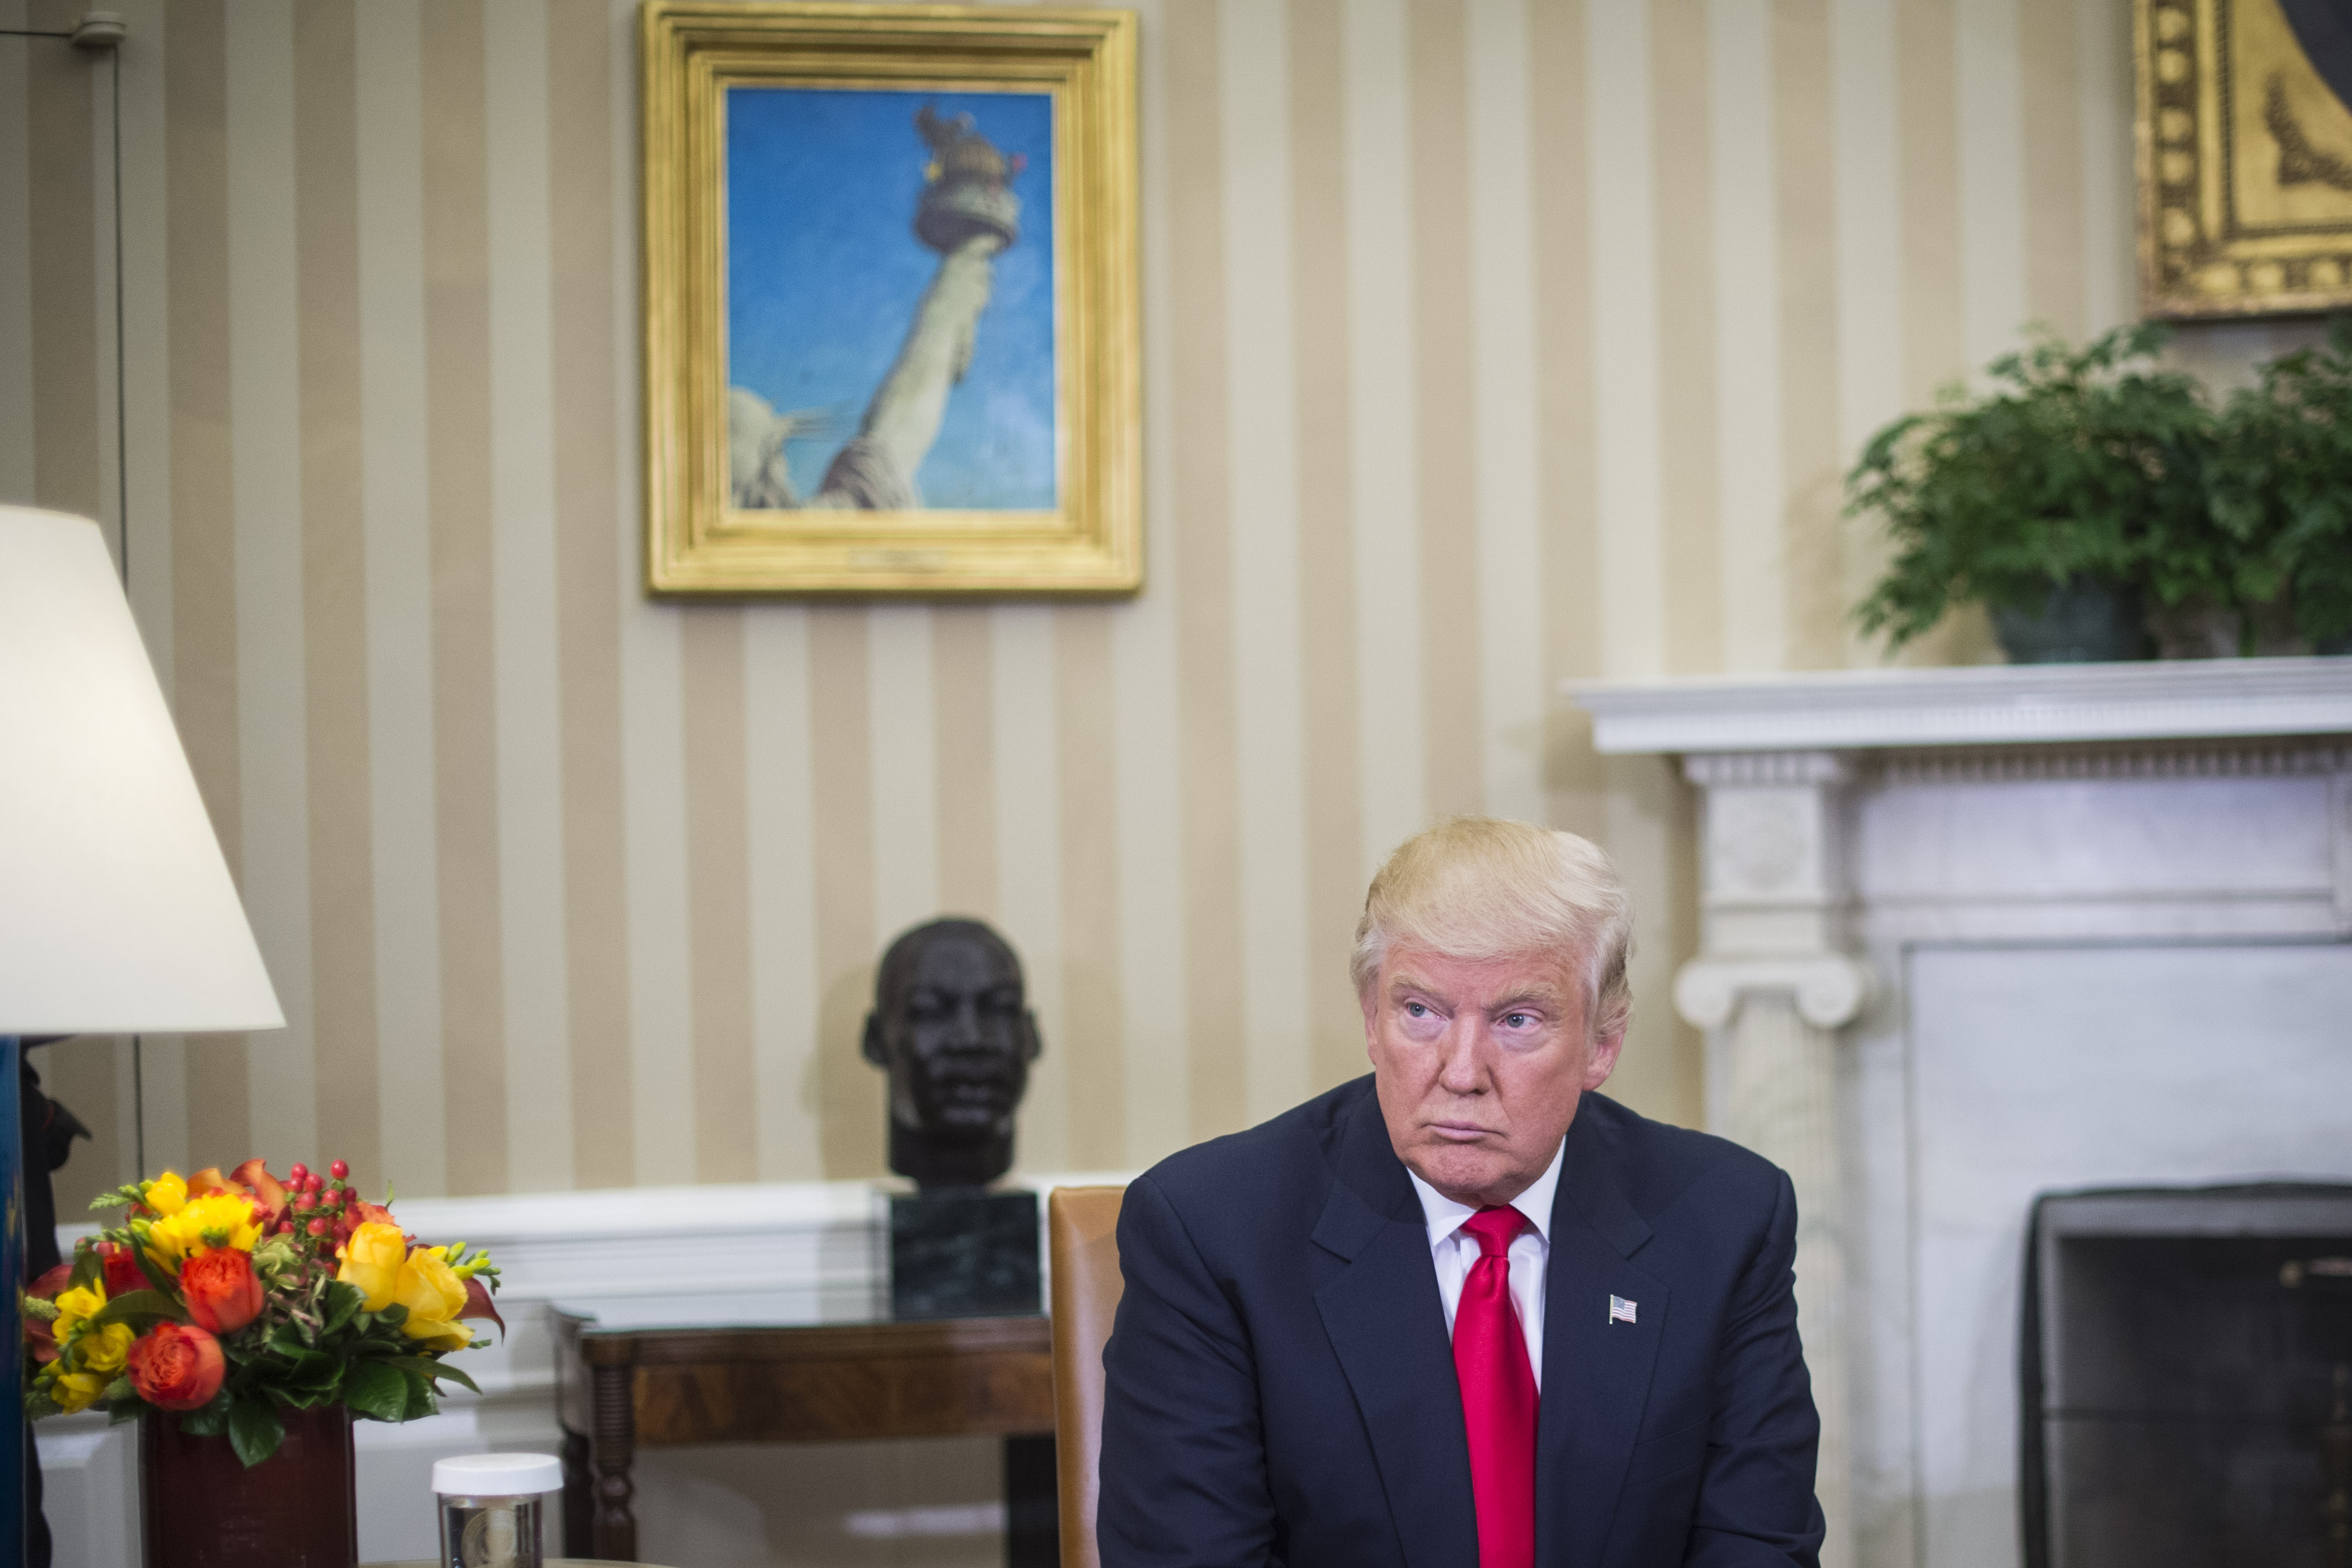 President-elect Donald Trump listens as President Barack Obama talks to the media in the Oval Office of the White House in Washington on Nov. 10, 2016 (The Washington Post/Getty Images)